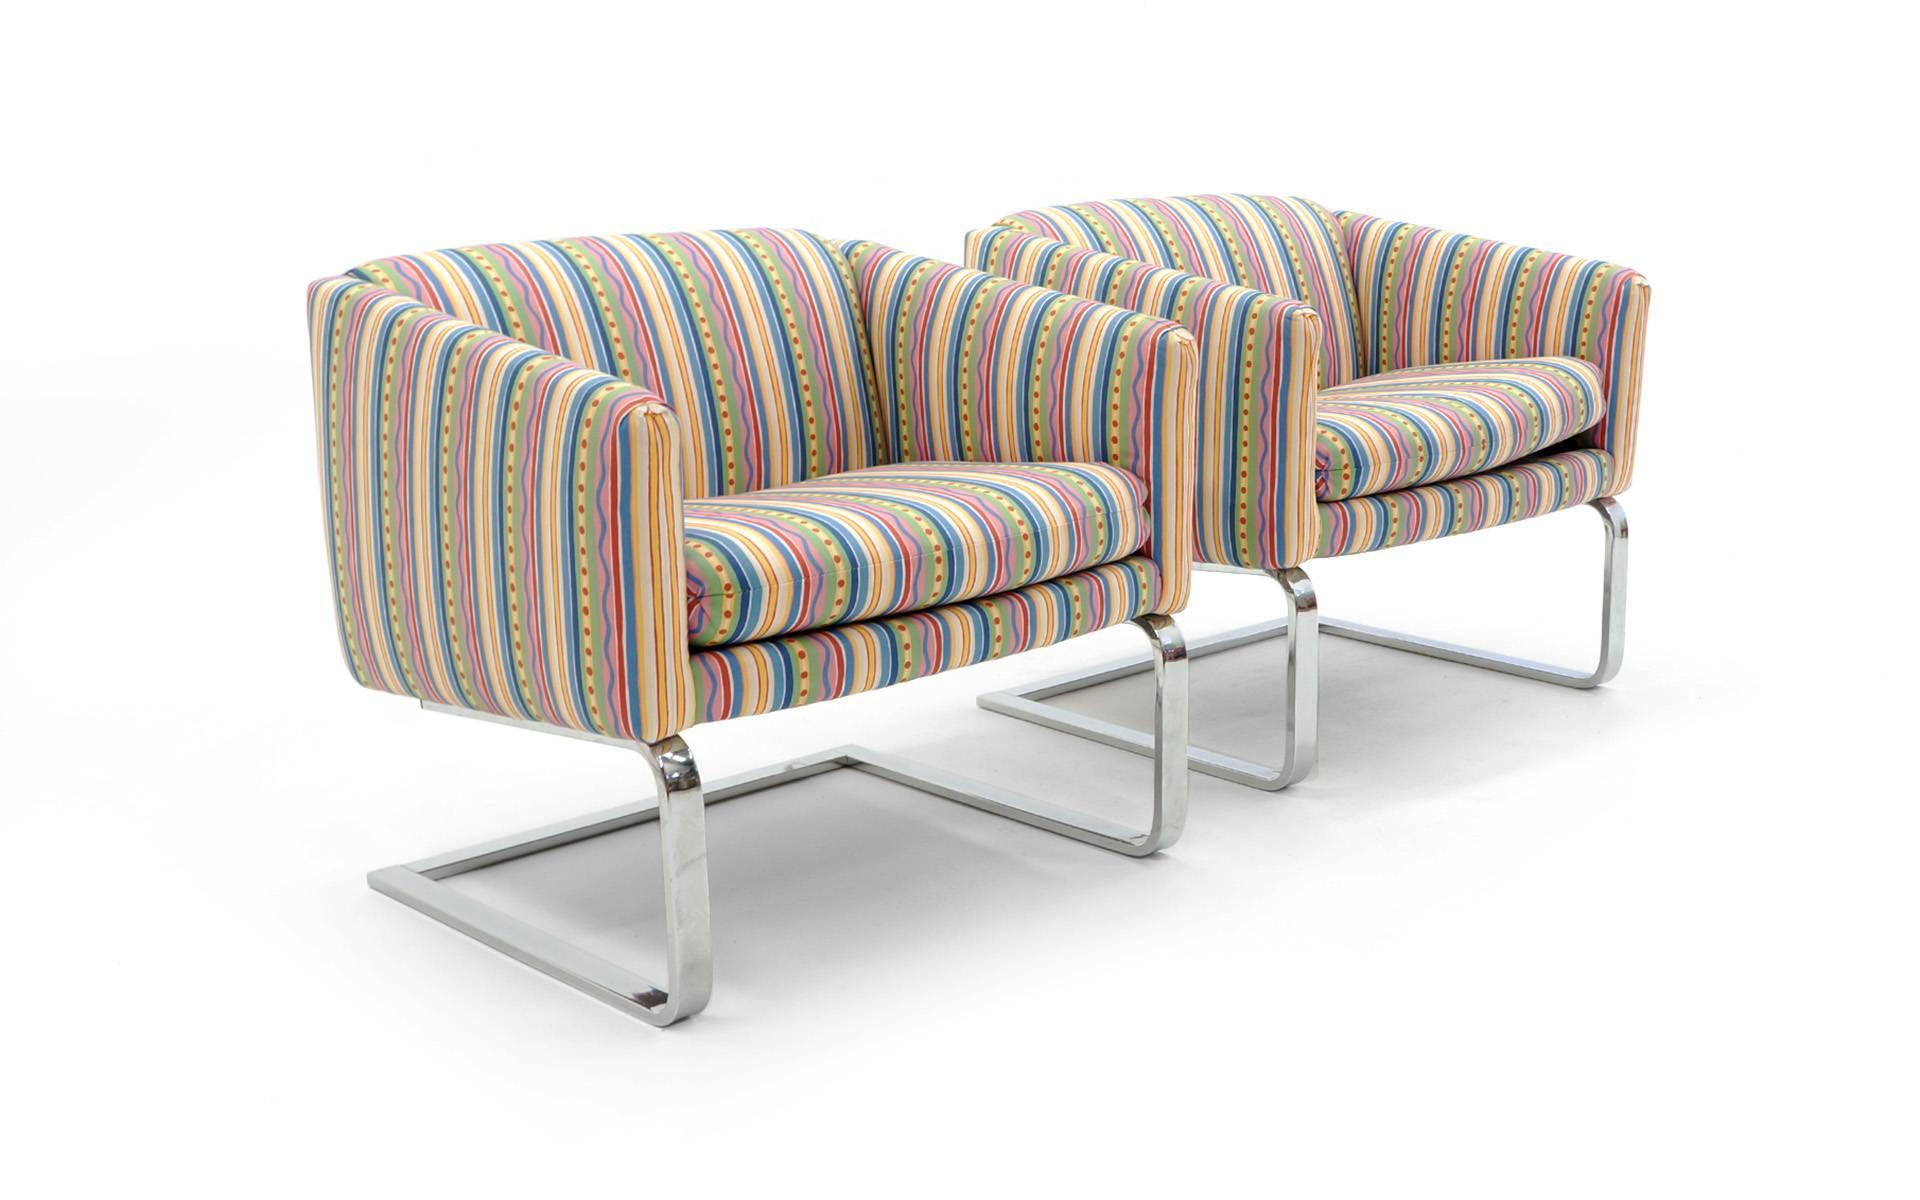 Pair of Milo Baughman Style lounge chairs in excellent condition, by Selig. Newly restored and reupholstered.